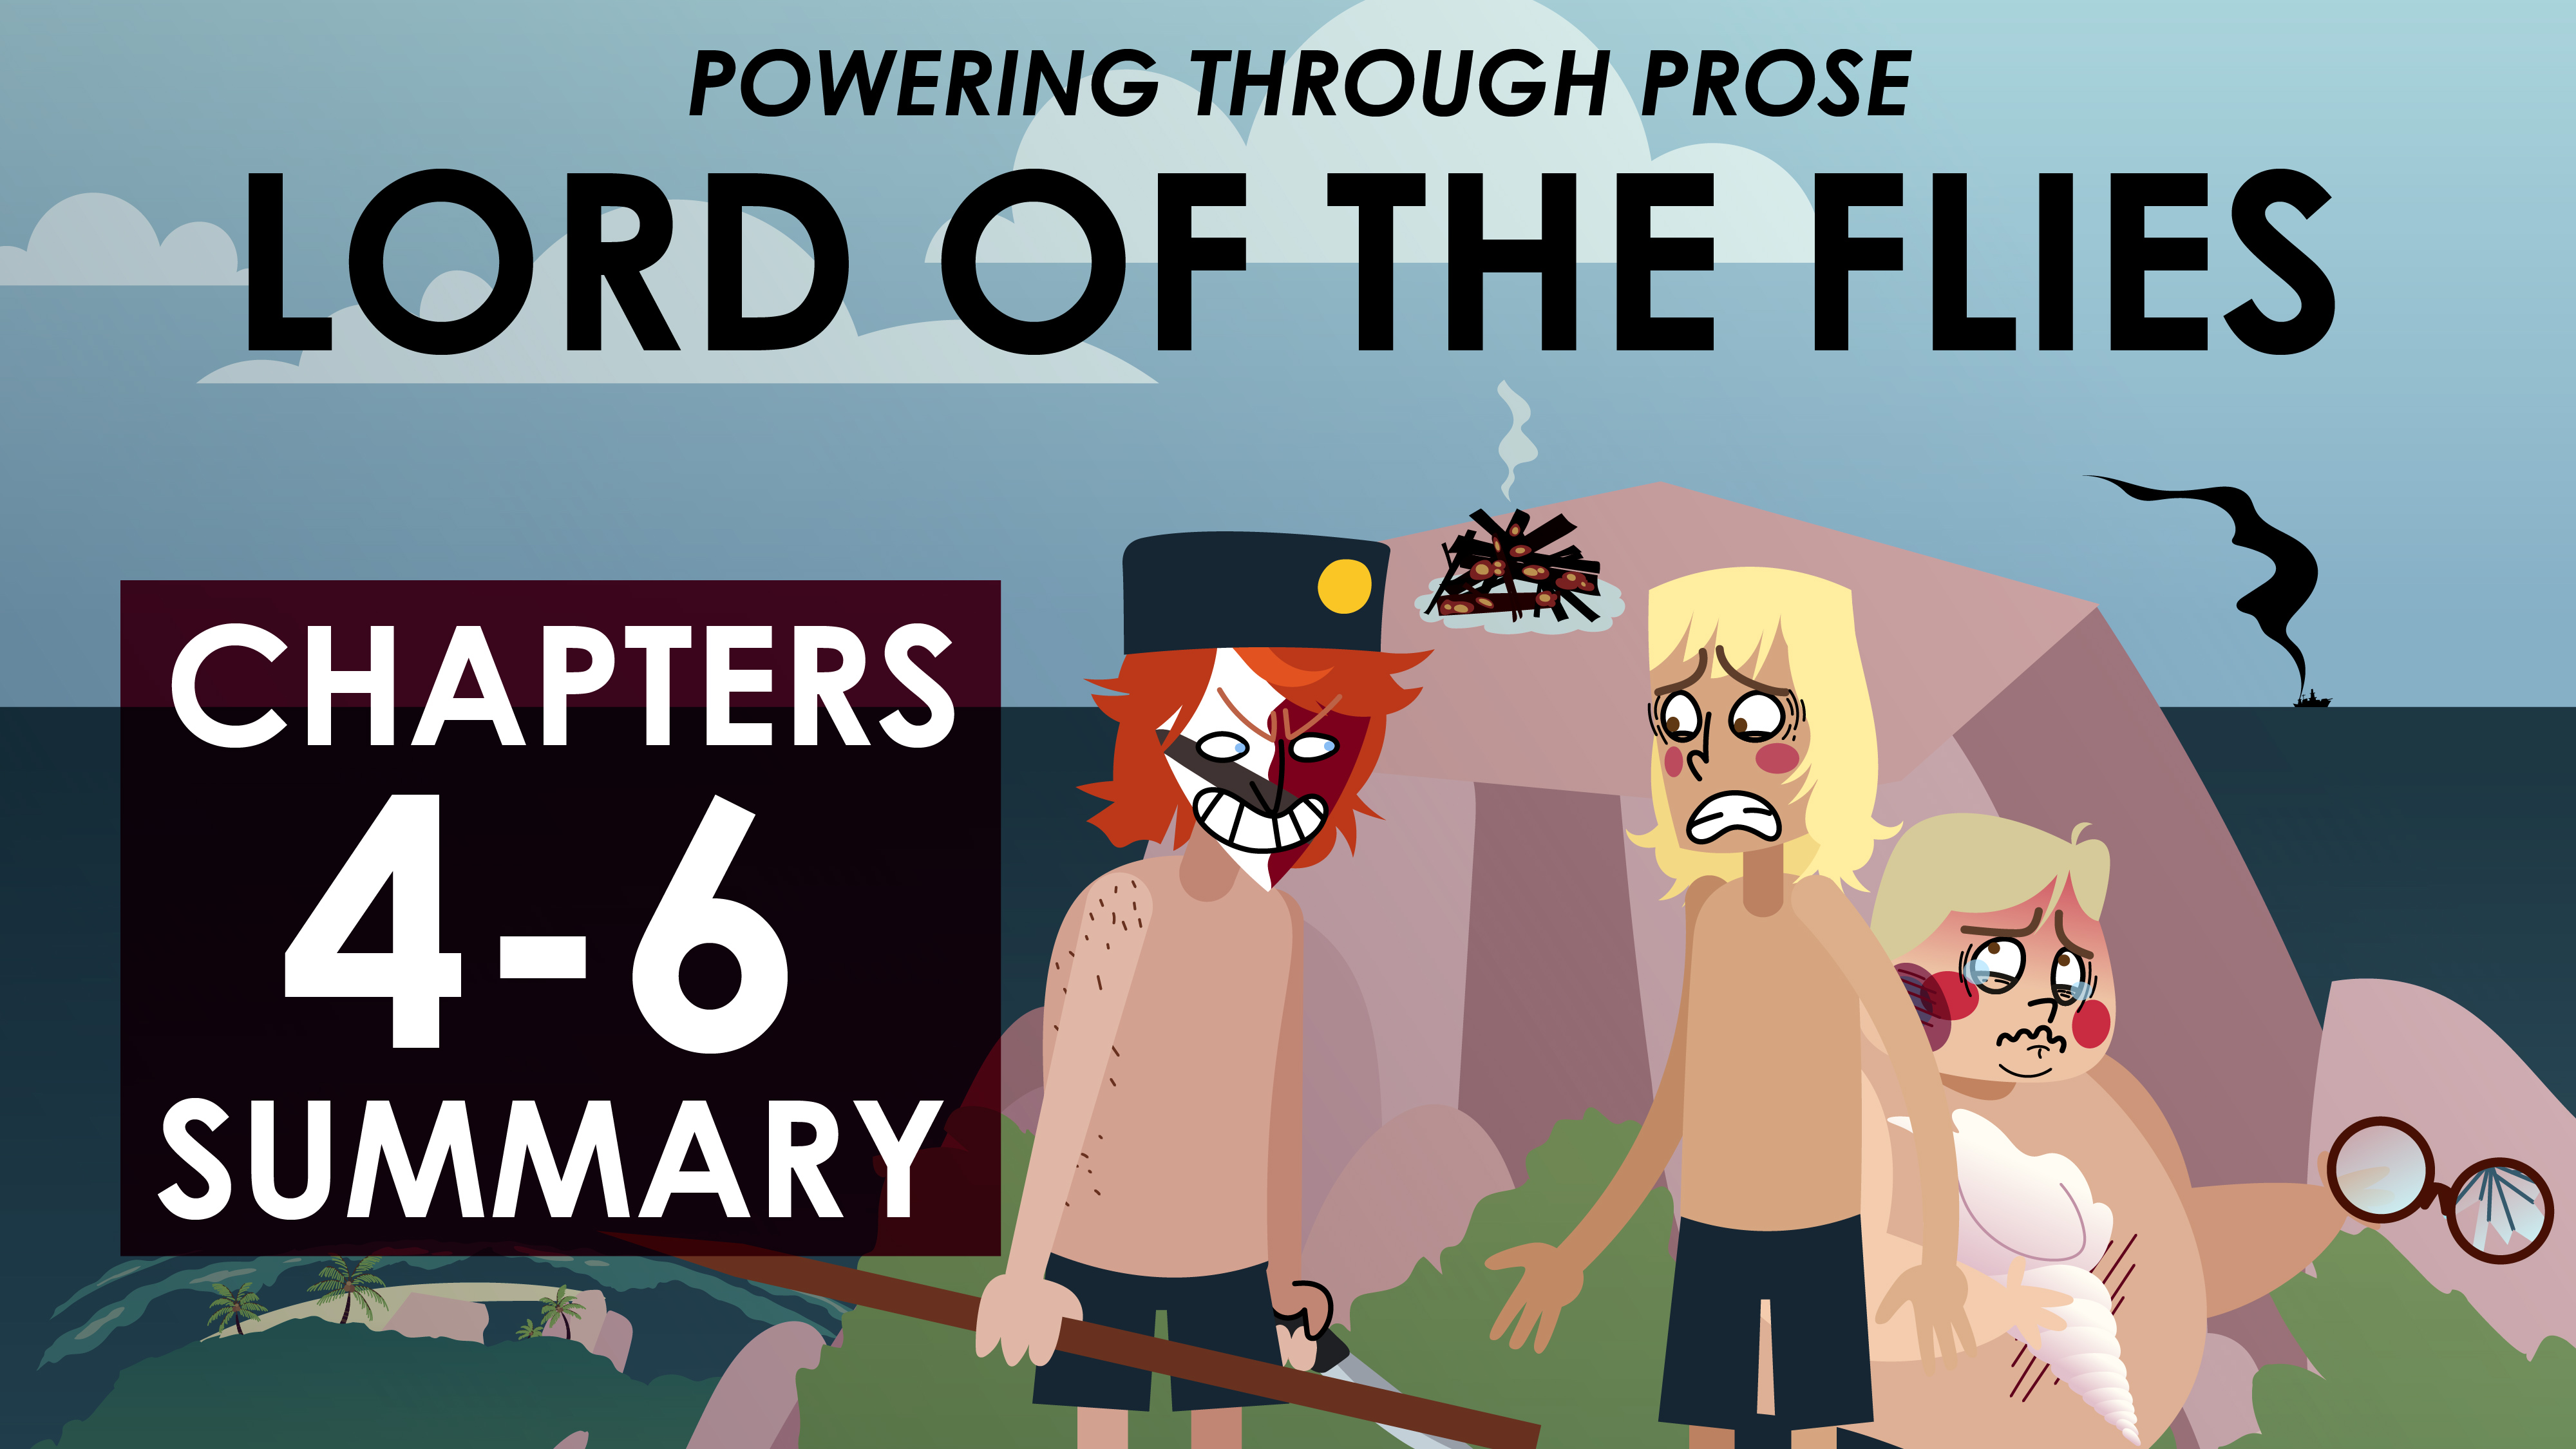 Lord of the Flies - William Golding - Chapters 4-6 Summary - Powering Through Prose Series